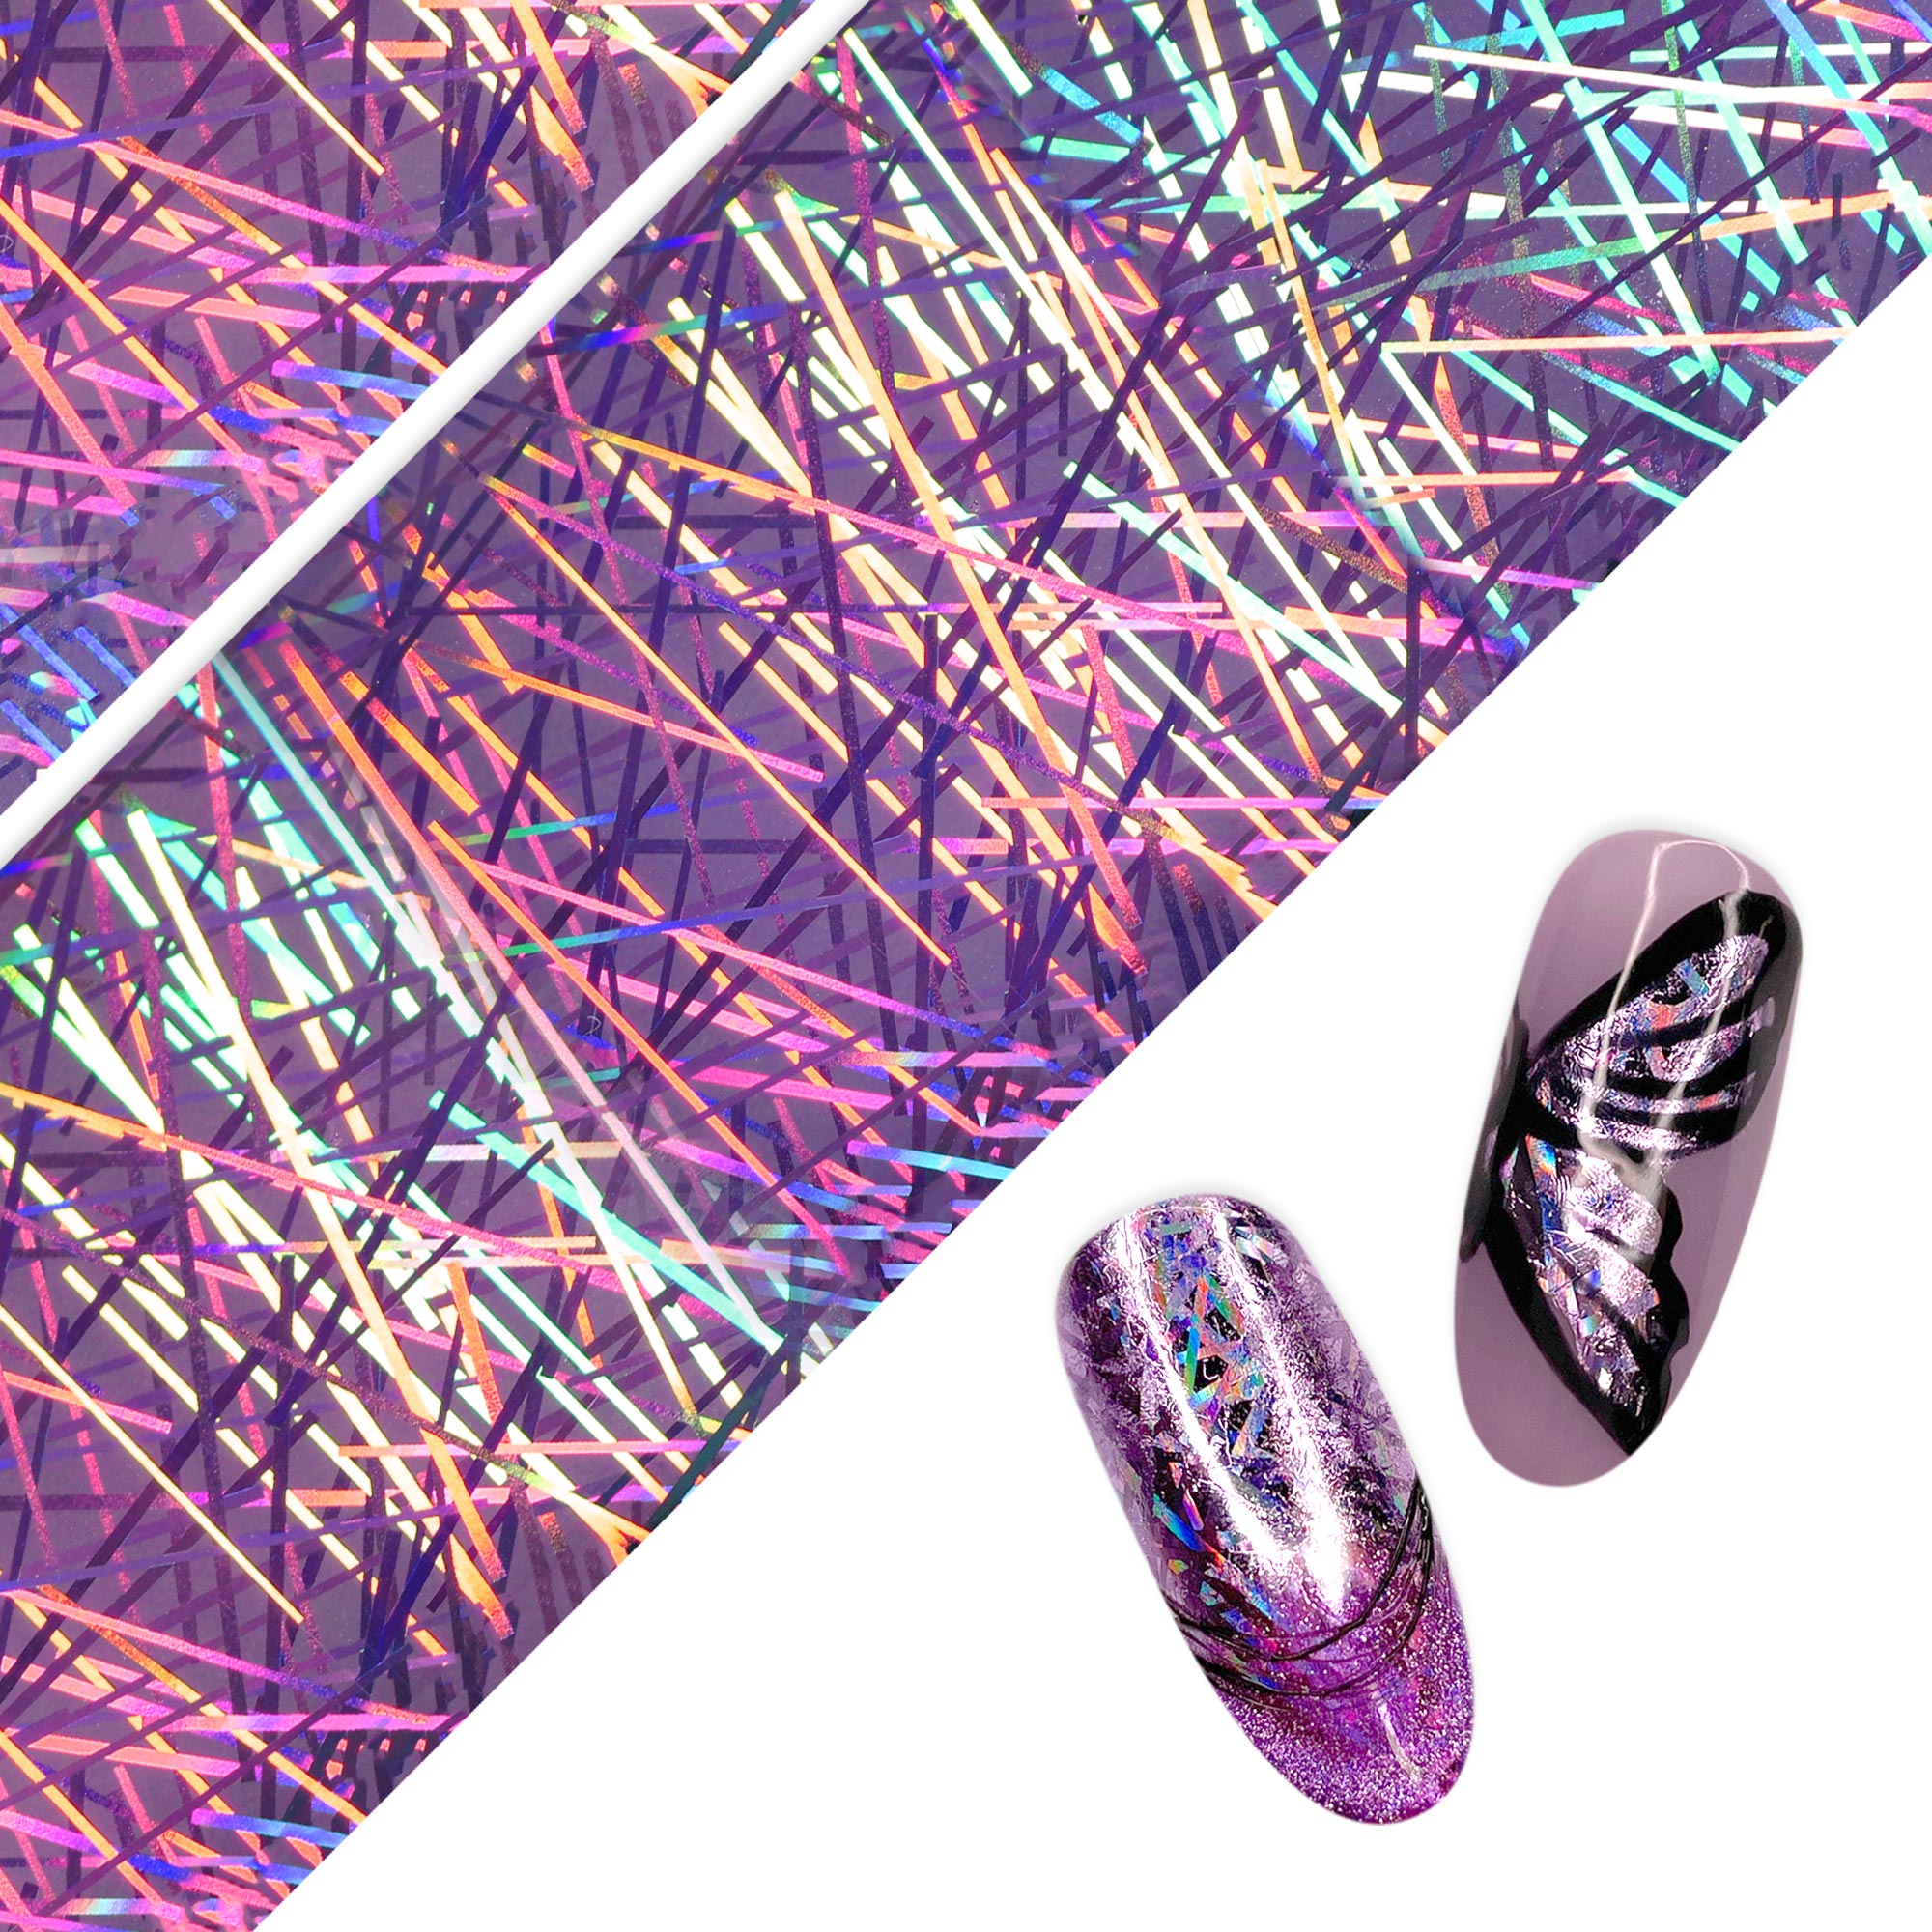 Daily Charme Nail Art Foil Paper Holographic Sea Shell Ocean